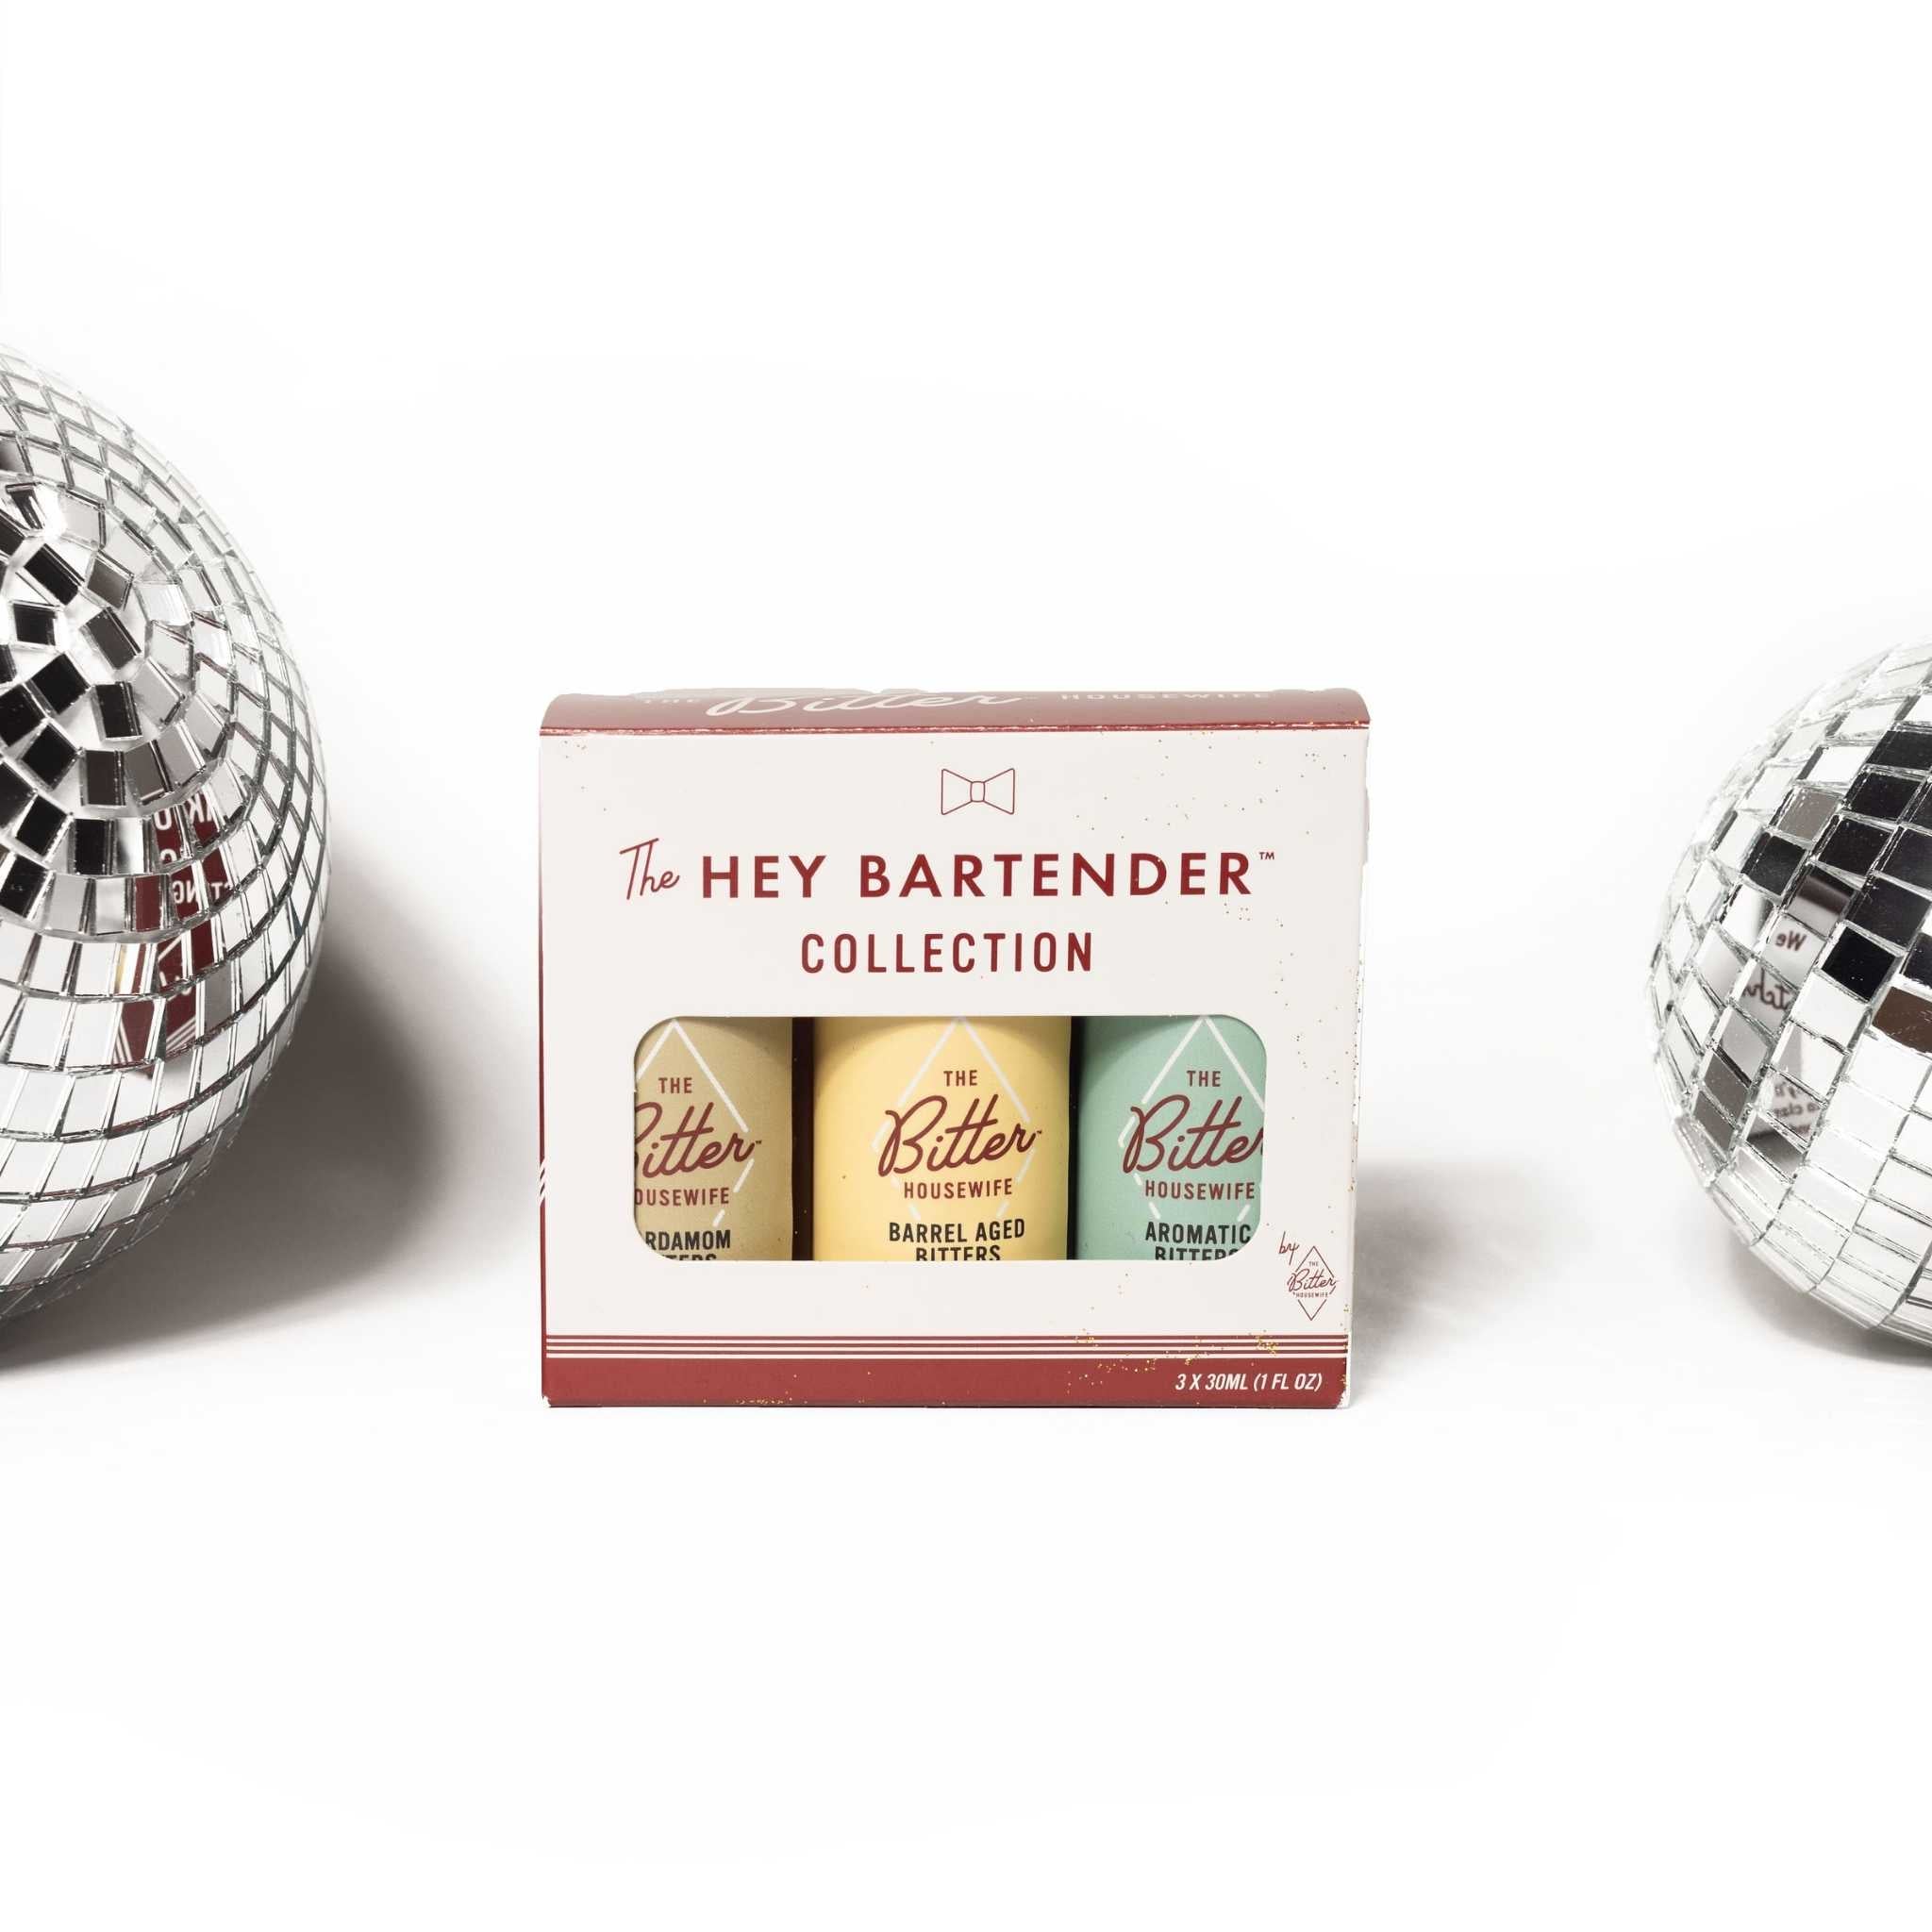 Hey Bartender Bitters Collect: a gift set or sample pack of 3 different types of bitters in partnership with the Bitter Housewife- another female founded brand. Use bitters to experiment and try out the different types: Cardamom, Barrel Aged and Aromatic. Perfect stocking stuffer for the holidays